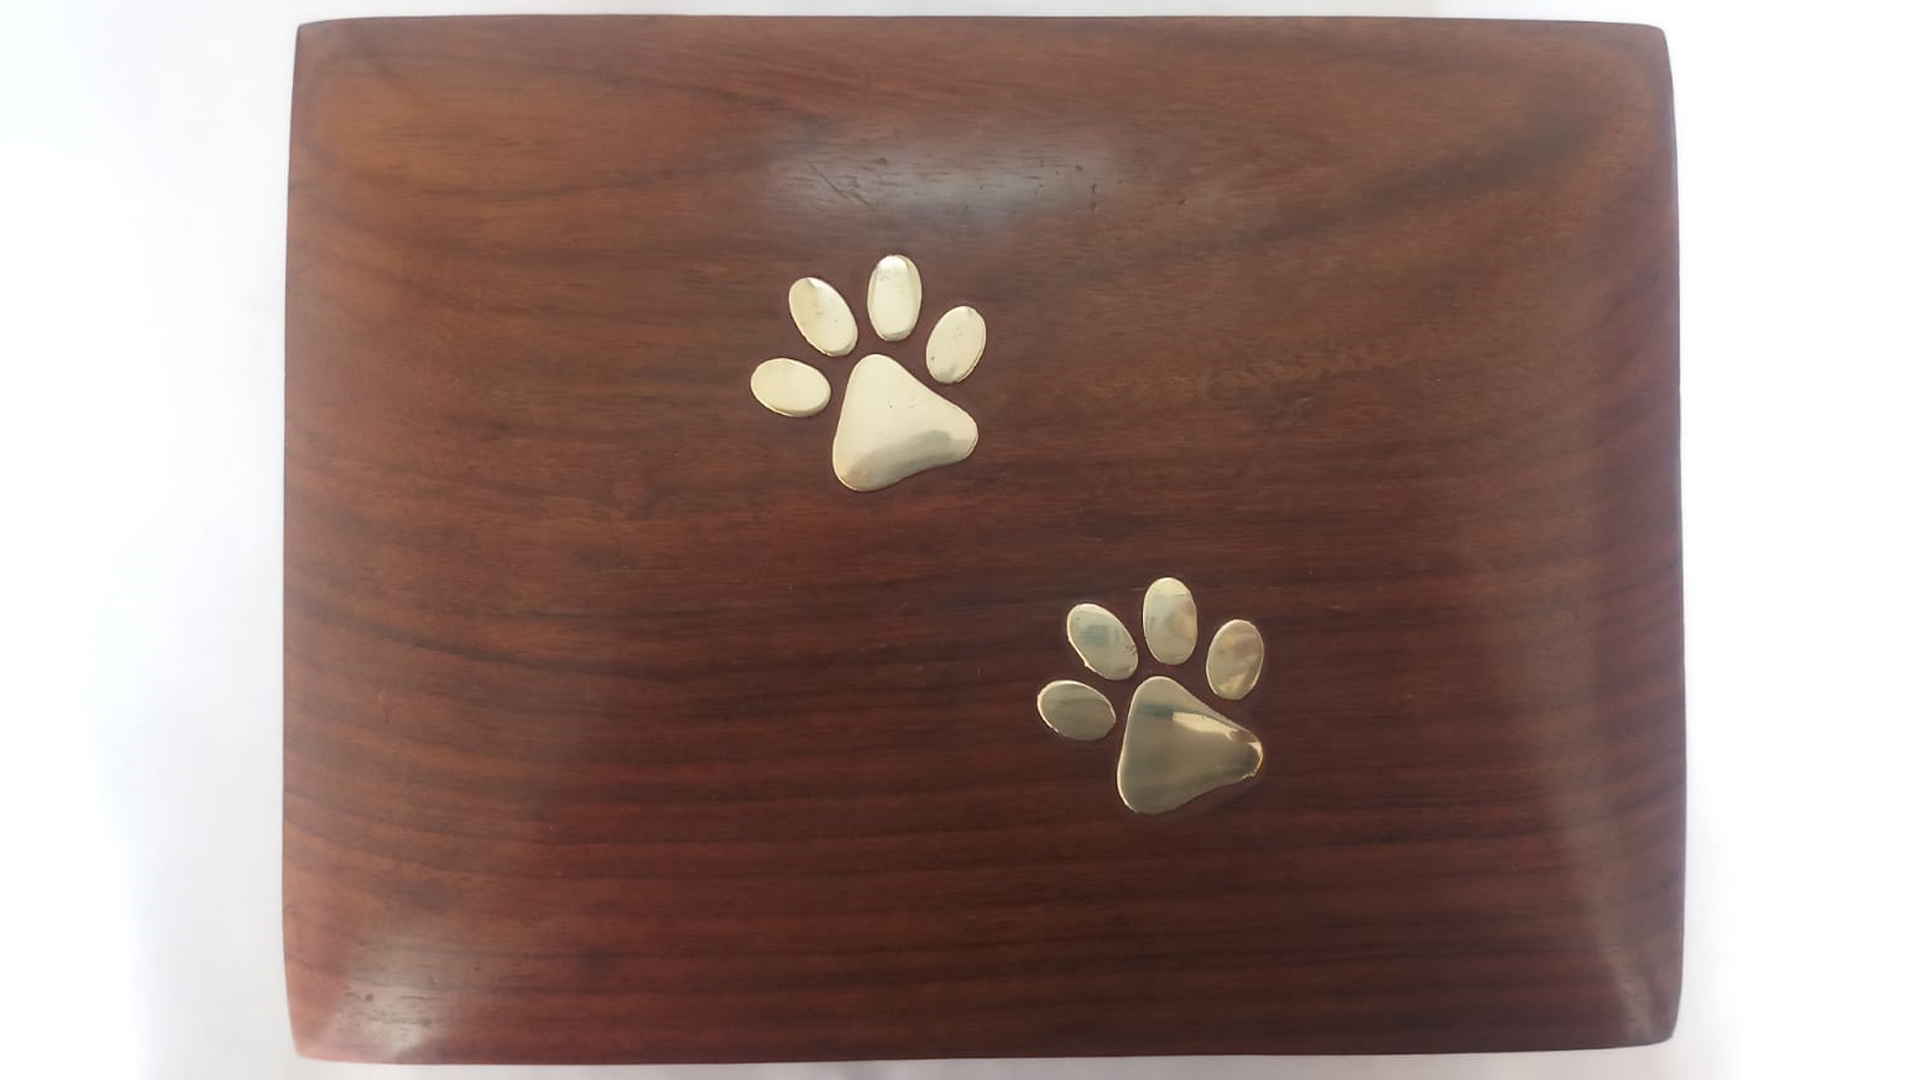 WORLD STAR INDIA Wooden Urn Box for Human Ashes Brass Paw design | Beautifully Handmade & Handcrafted | Brass Inlay Work | Wooden Urns for Human Ashes Adult for - Wooden Cremation Urns for Ashes , Best Quality Made India Urn Box from World Star India